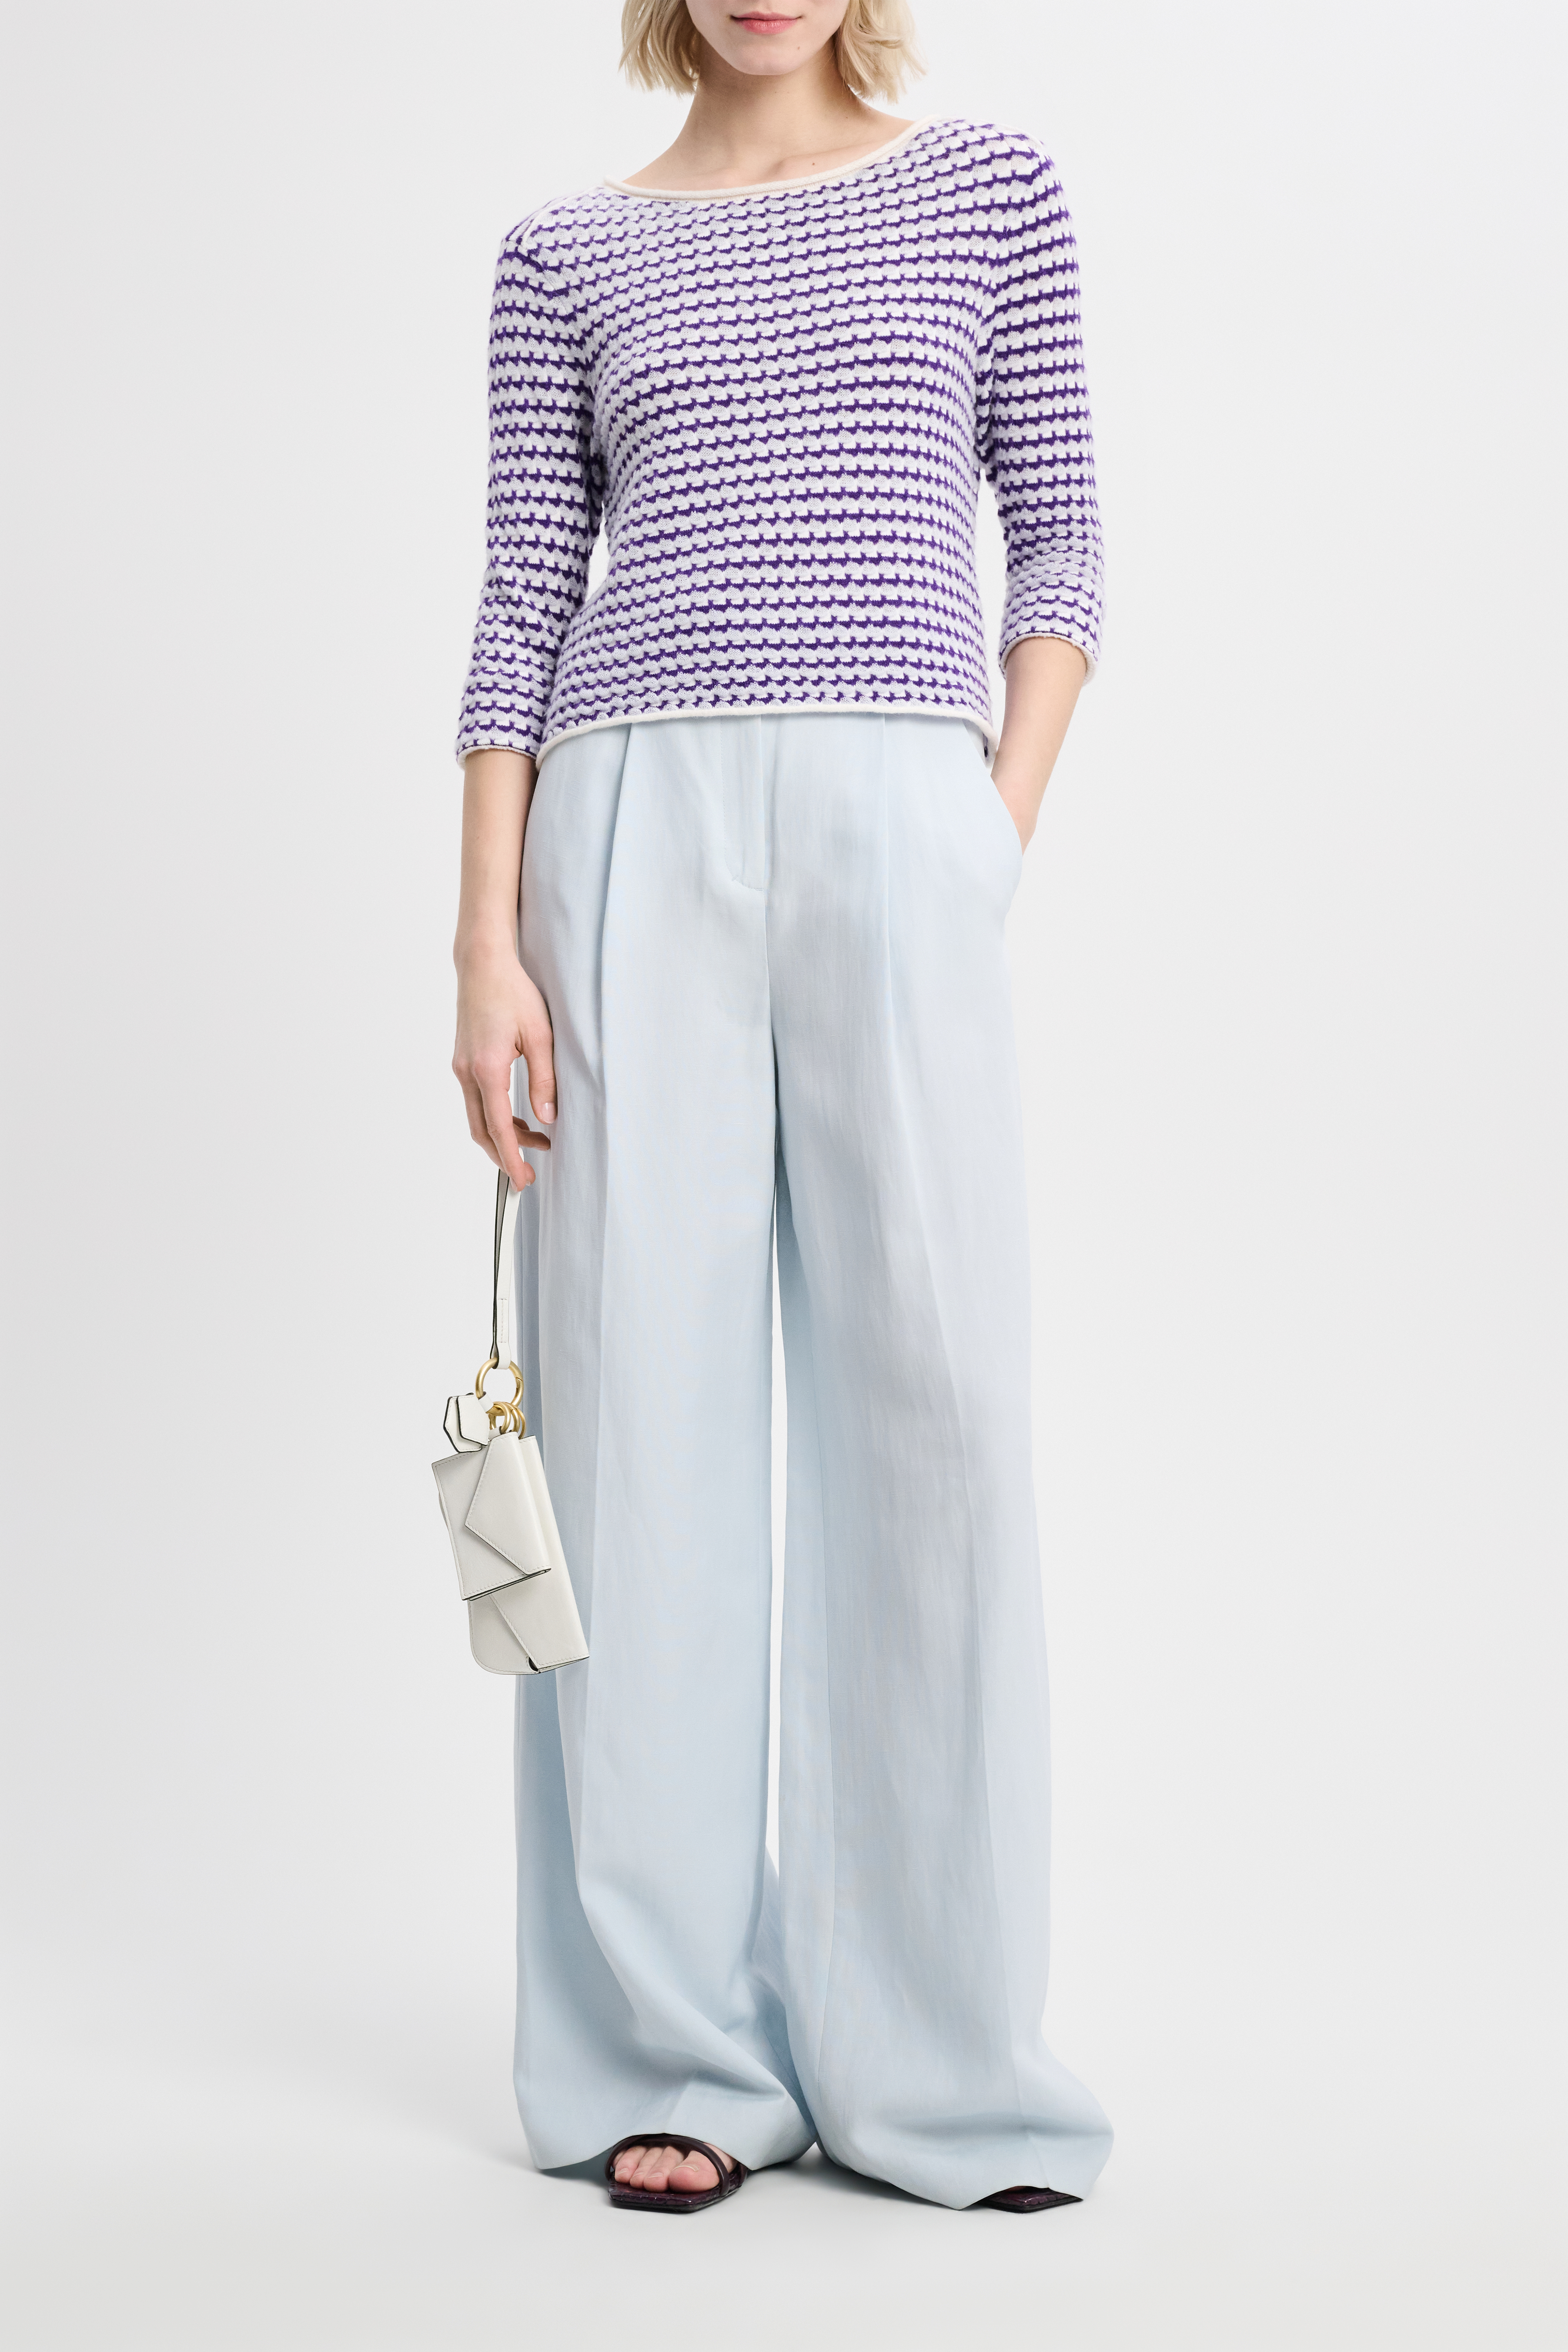 Dorothee Schumacher Jacquard knit top with bateaux